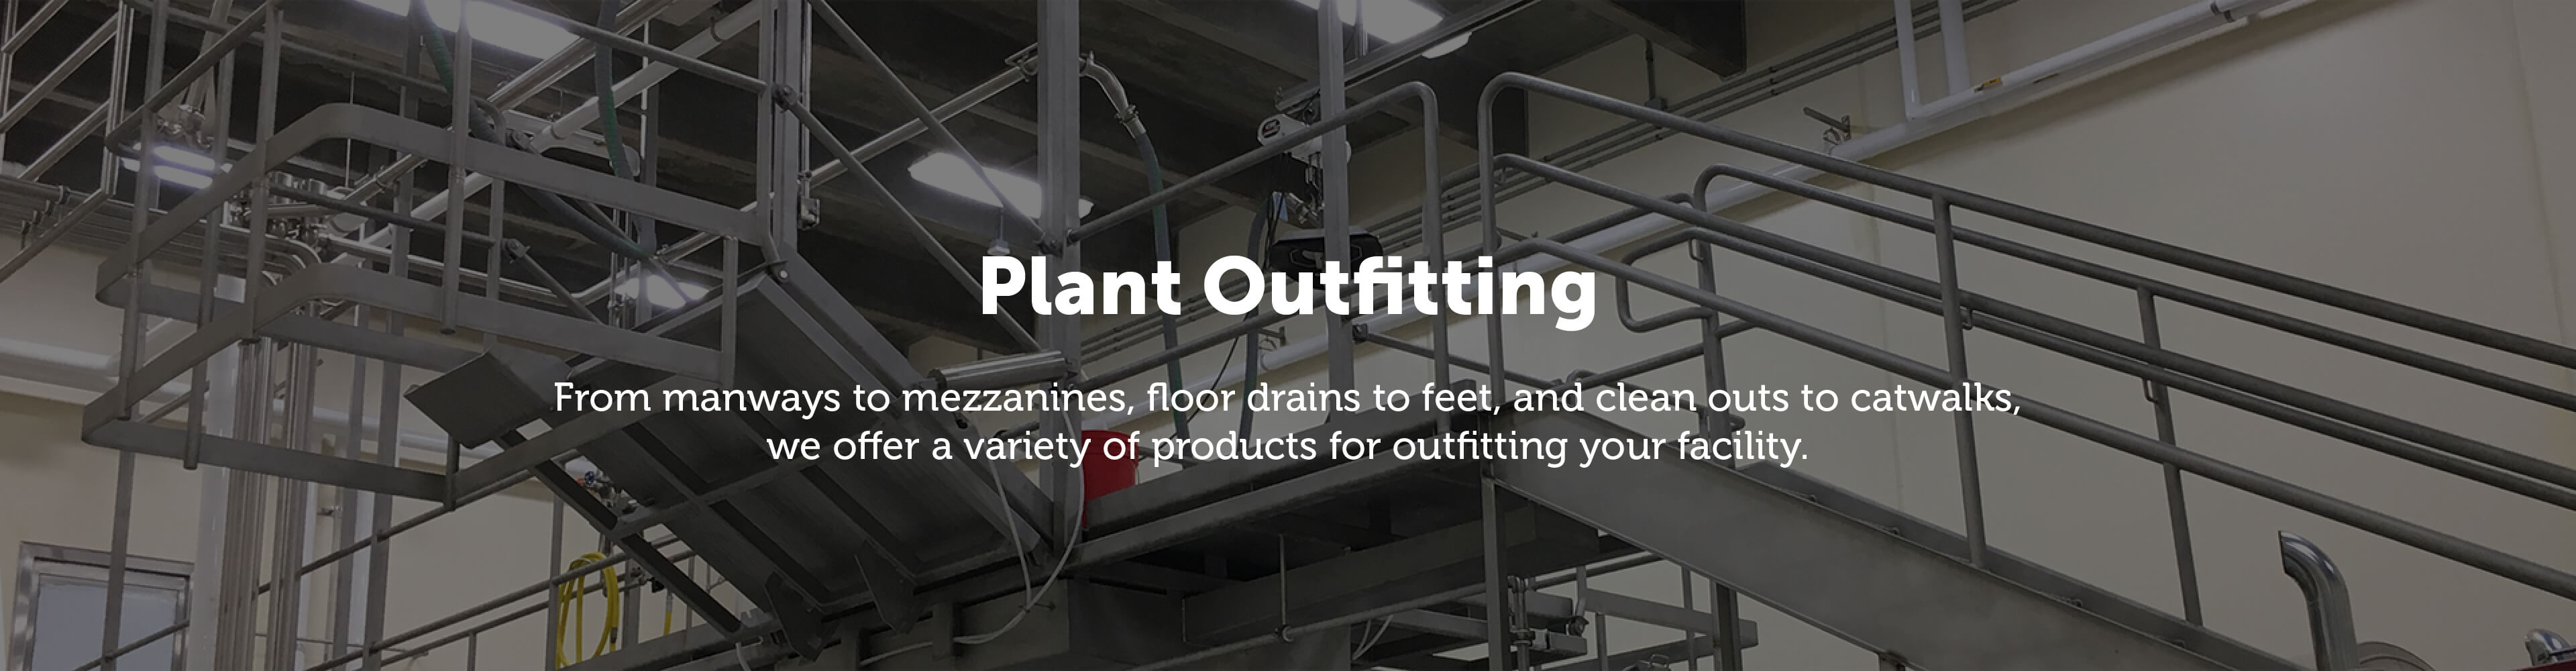 Koss Plant Outfitting